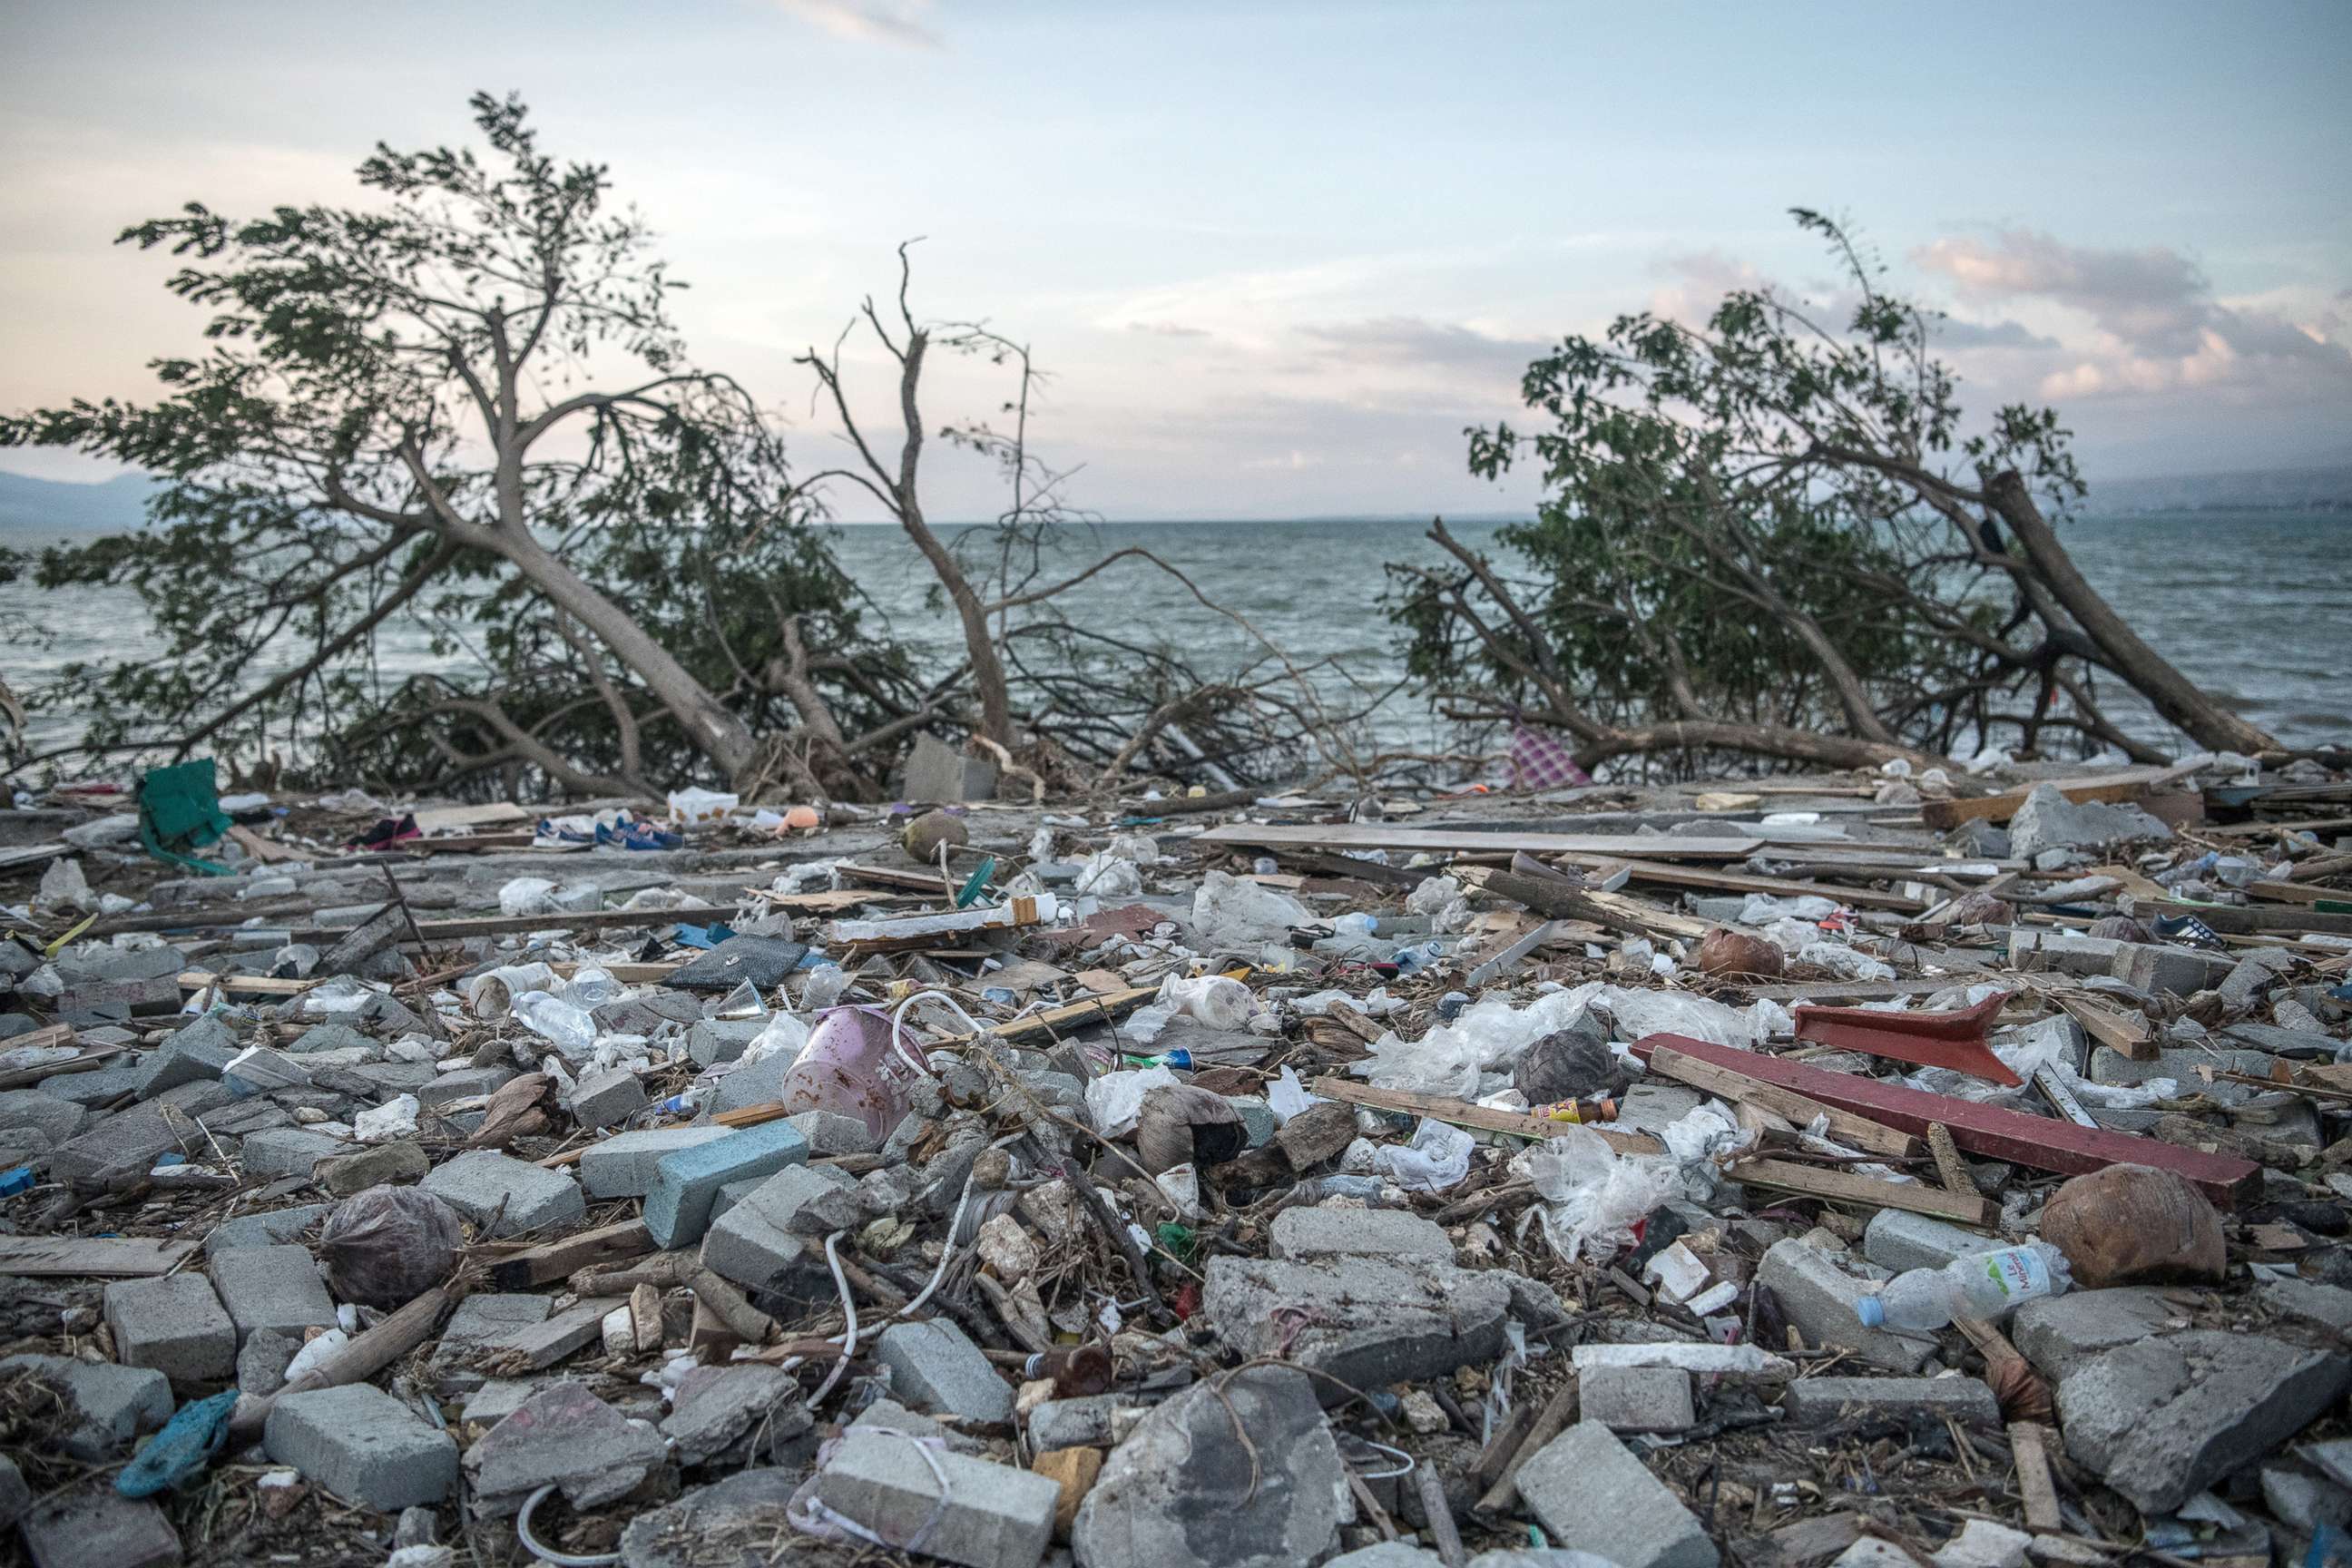 PHOTO: Debris and uprooted trees lie on the beach following a tsunami, Oct. 1, 2018, in Palu, Indonesia.